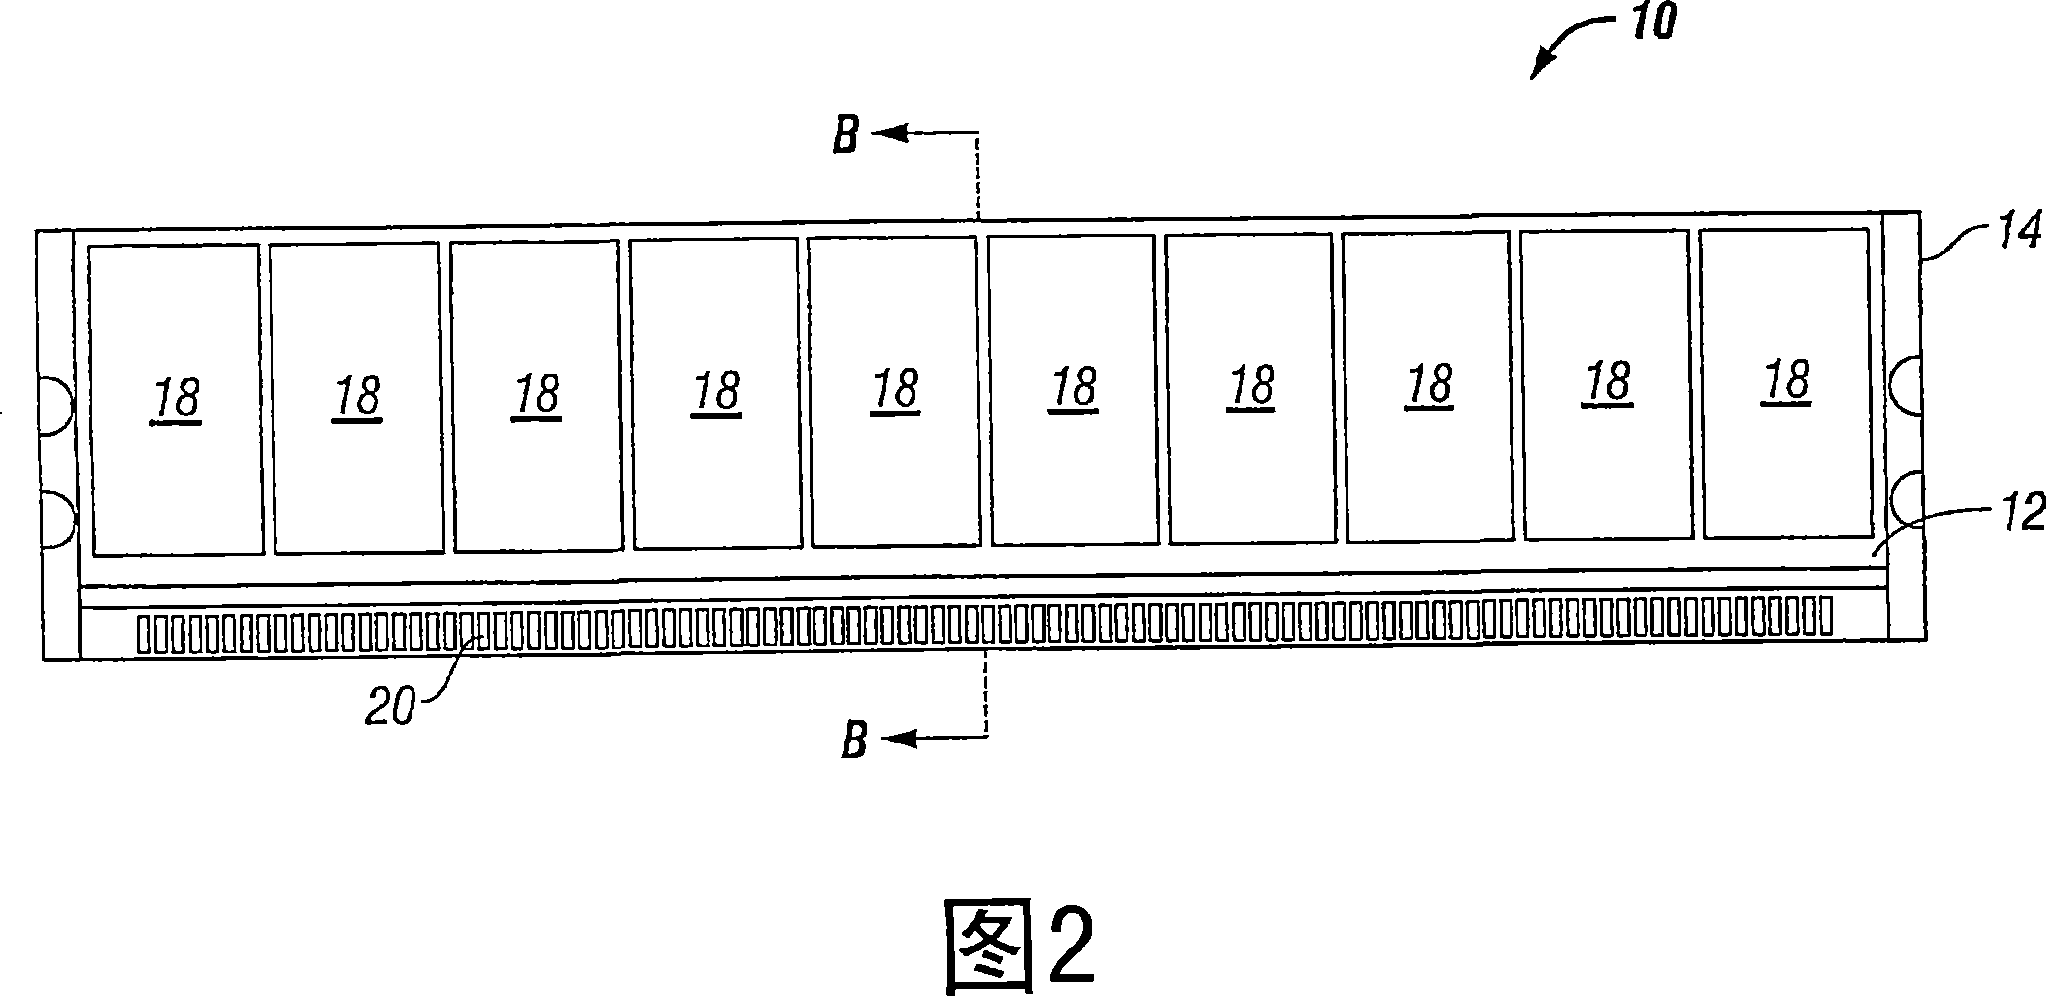 High capacity thin module system and method